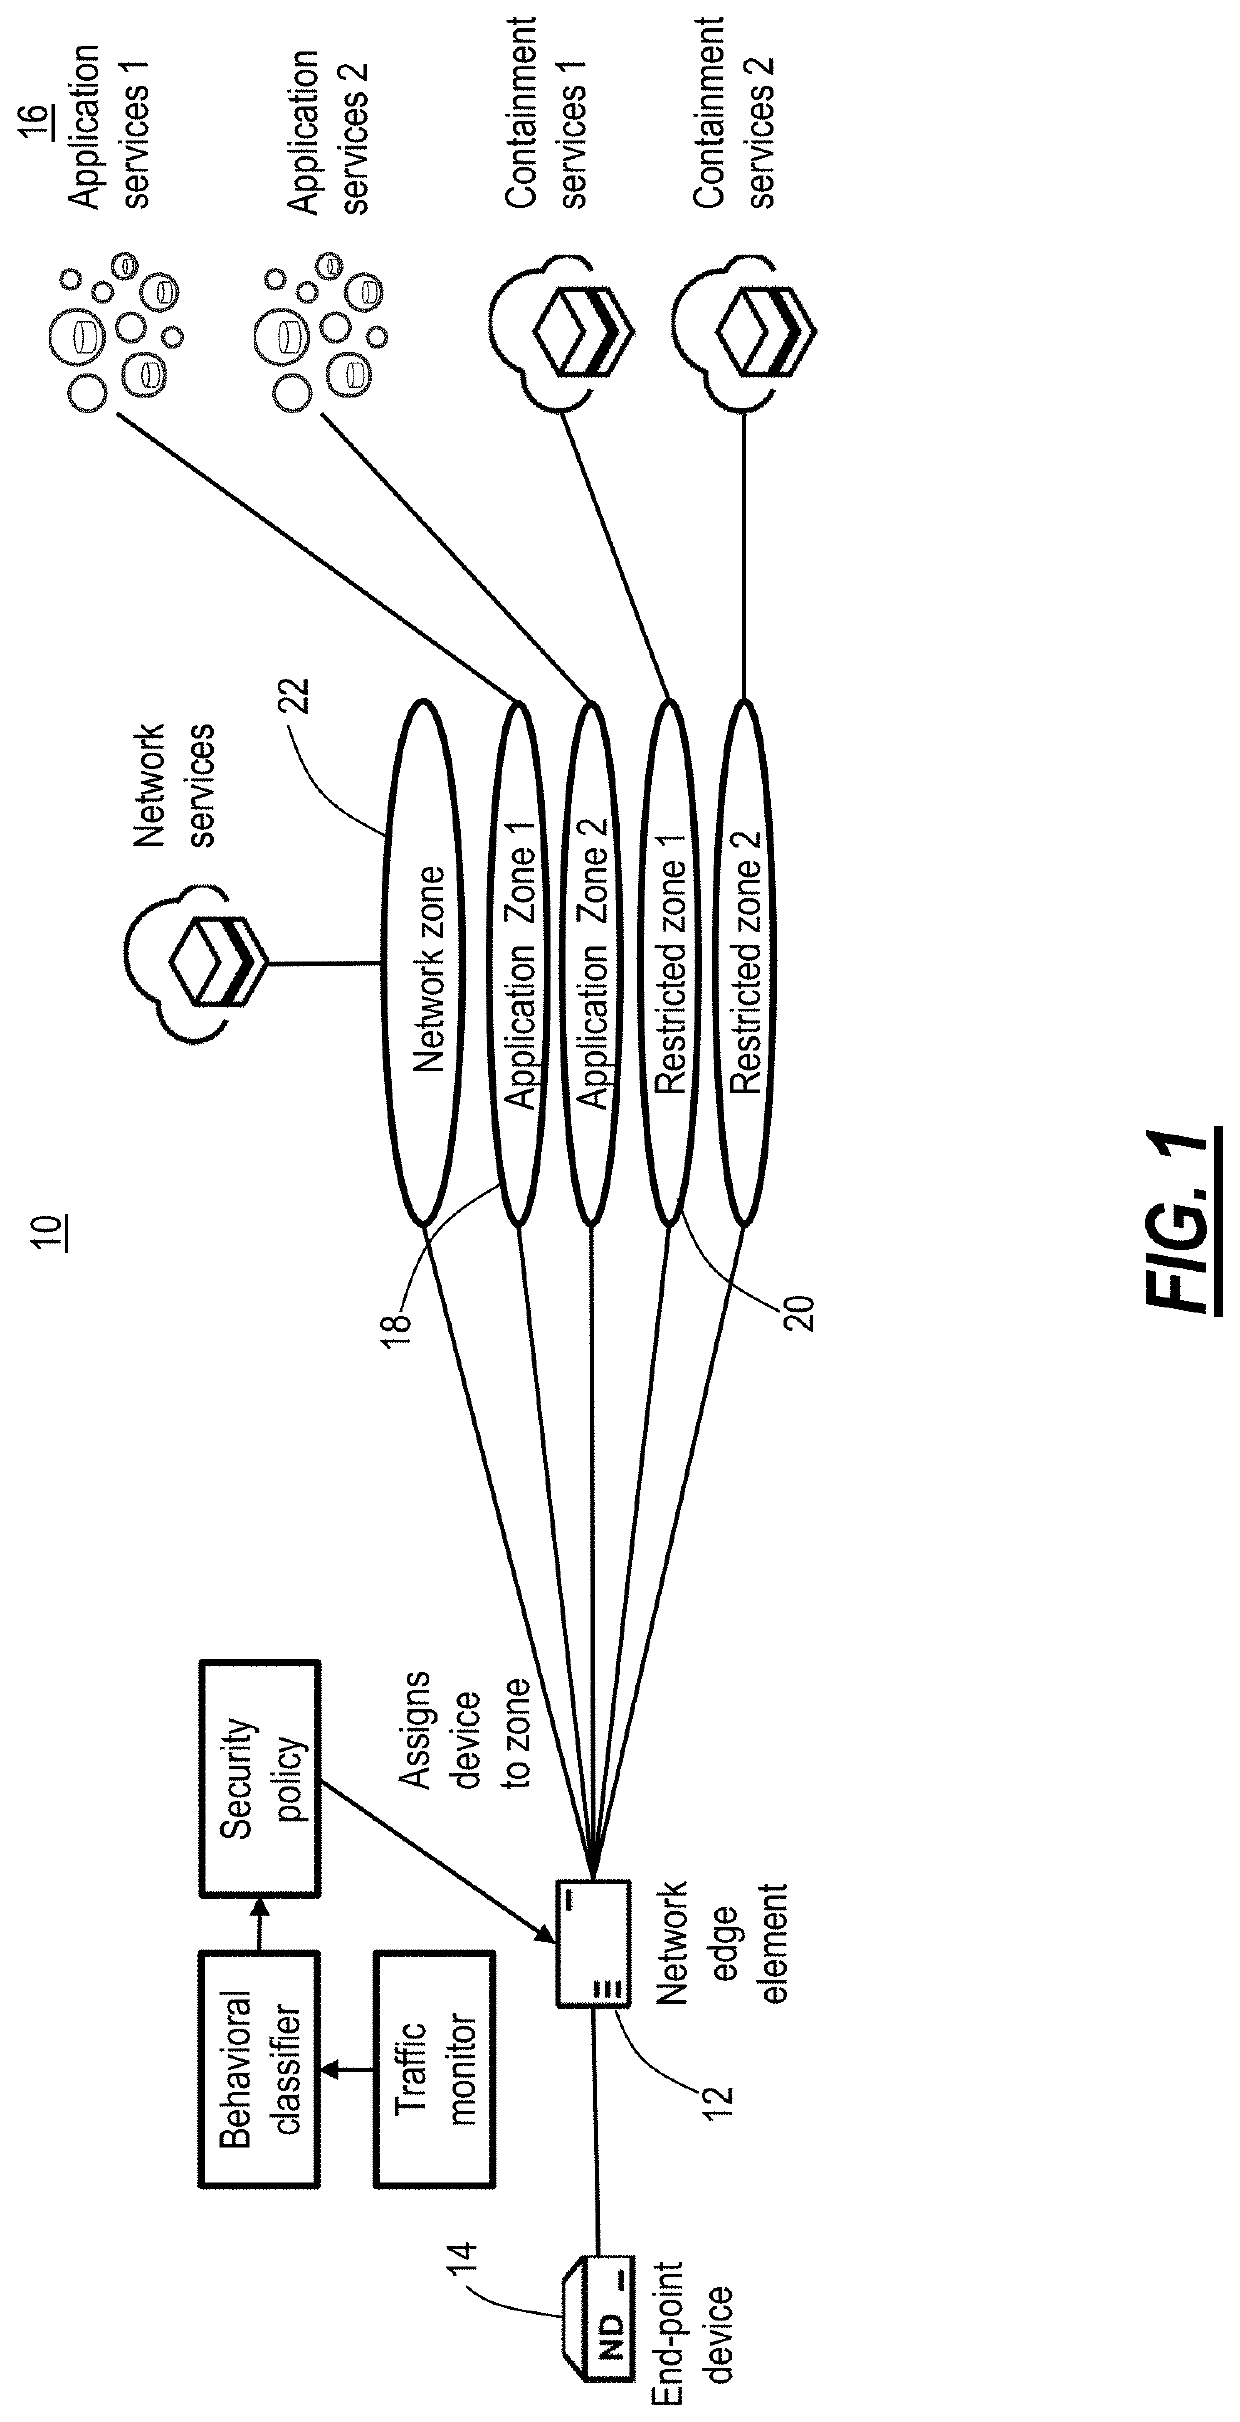 Network architecture providing device identification and redirection using whitelisting traffic classification